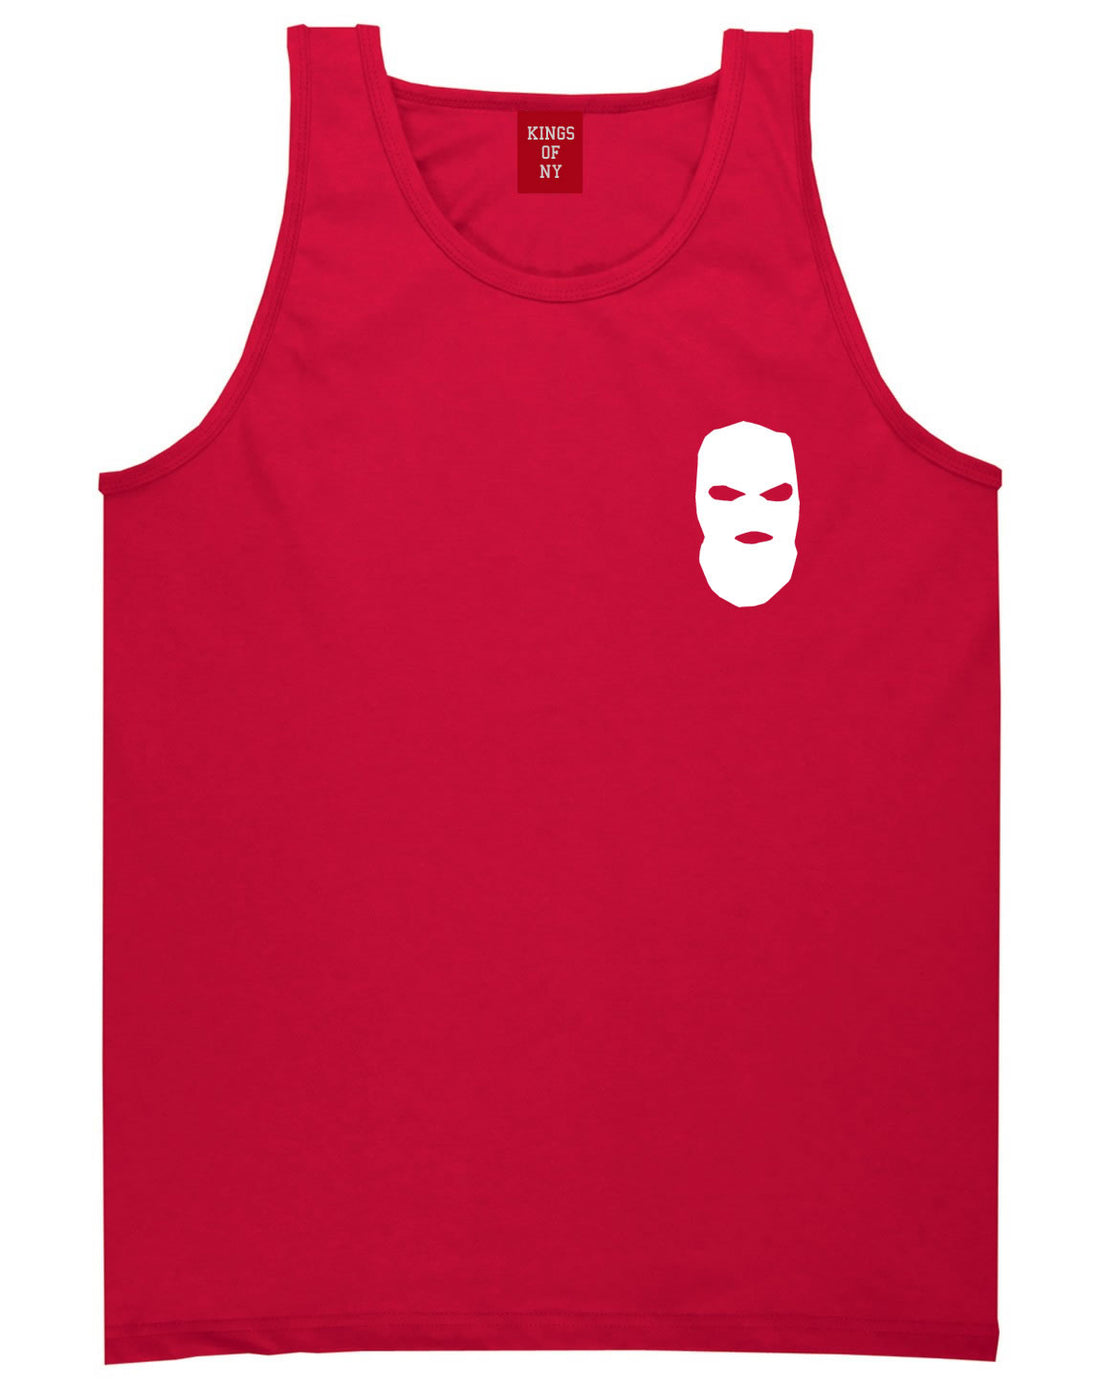 Ski Mask Way Robber Chest Logo Tank Top in Red By Kings Of NY